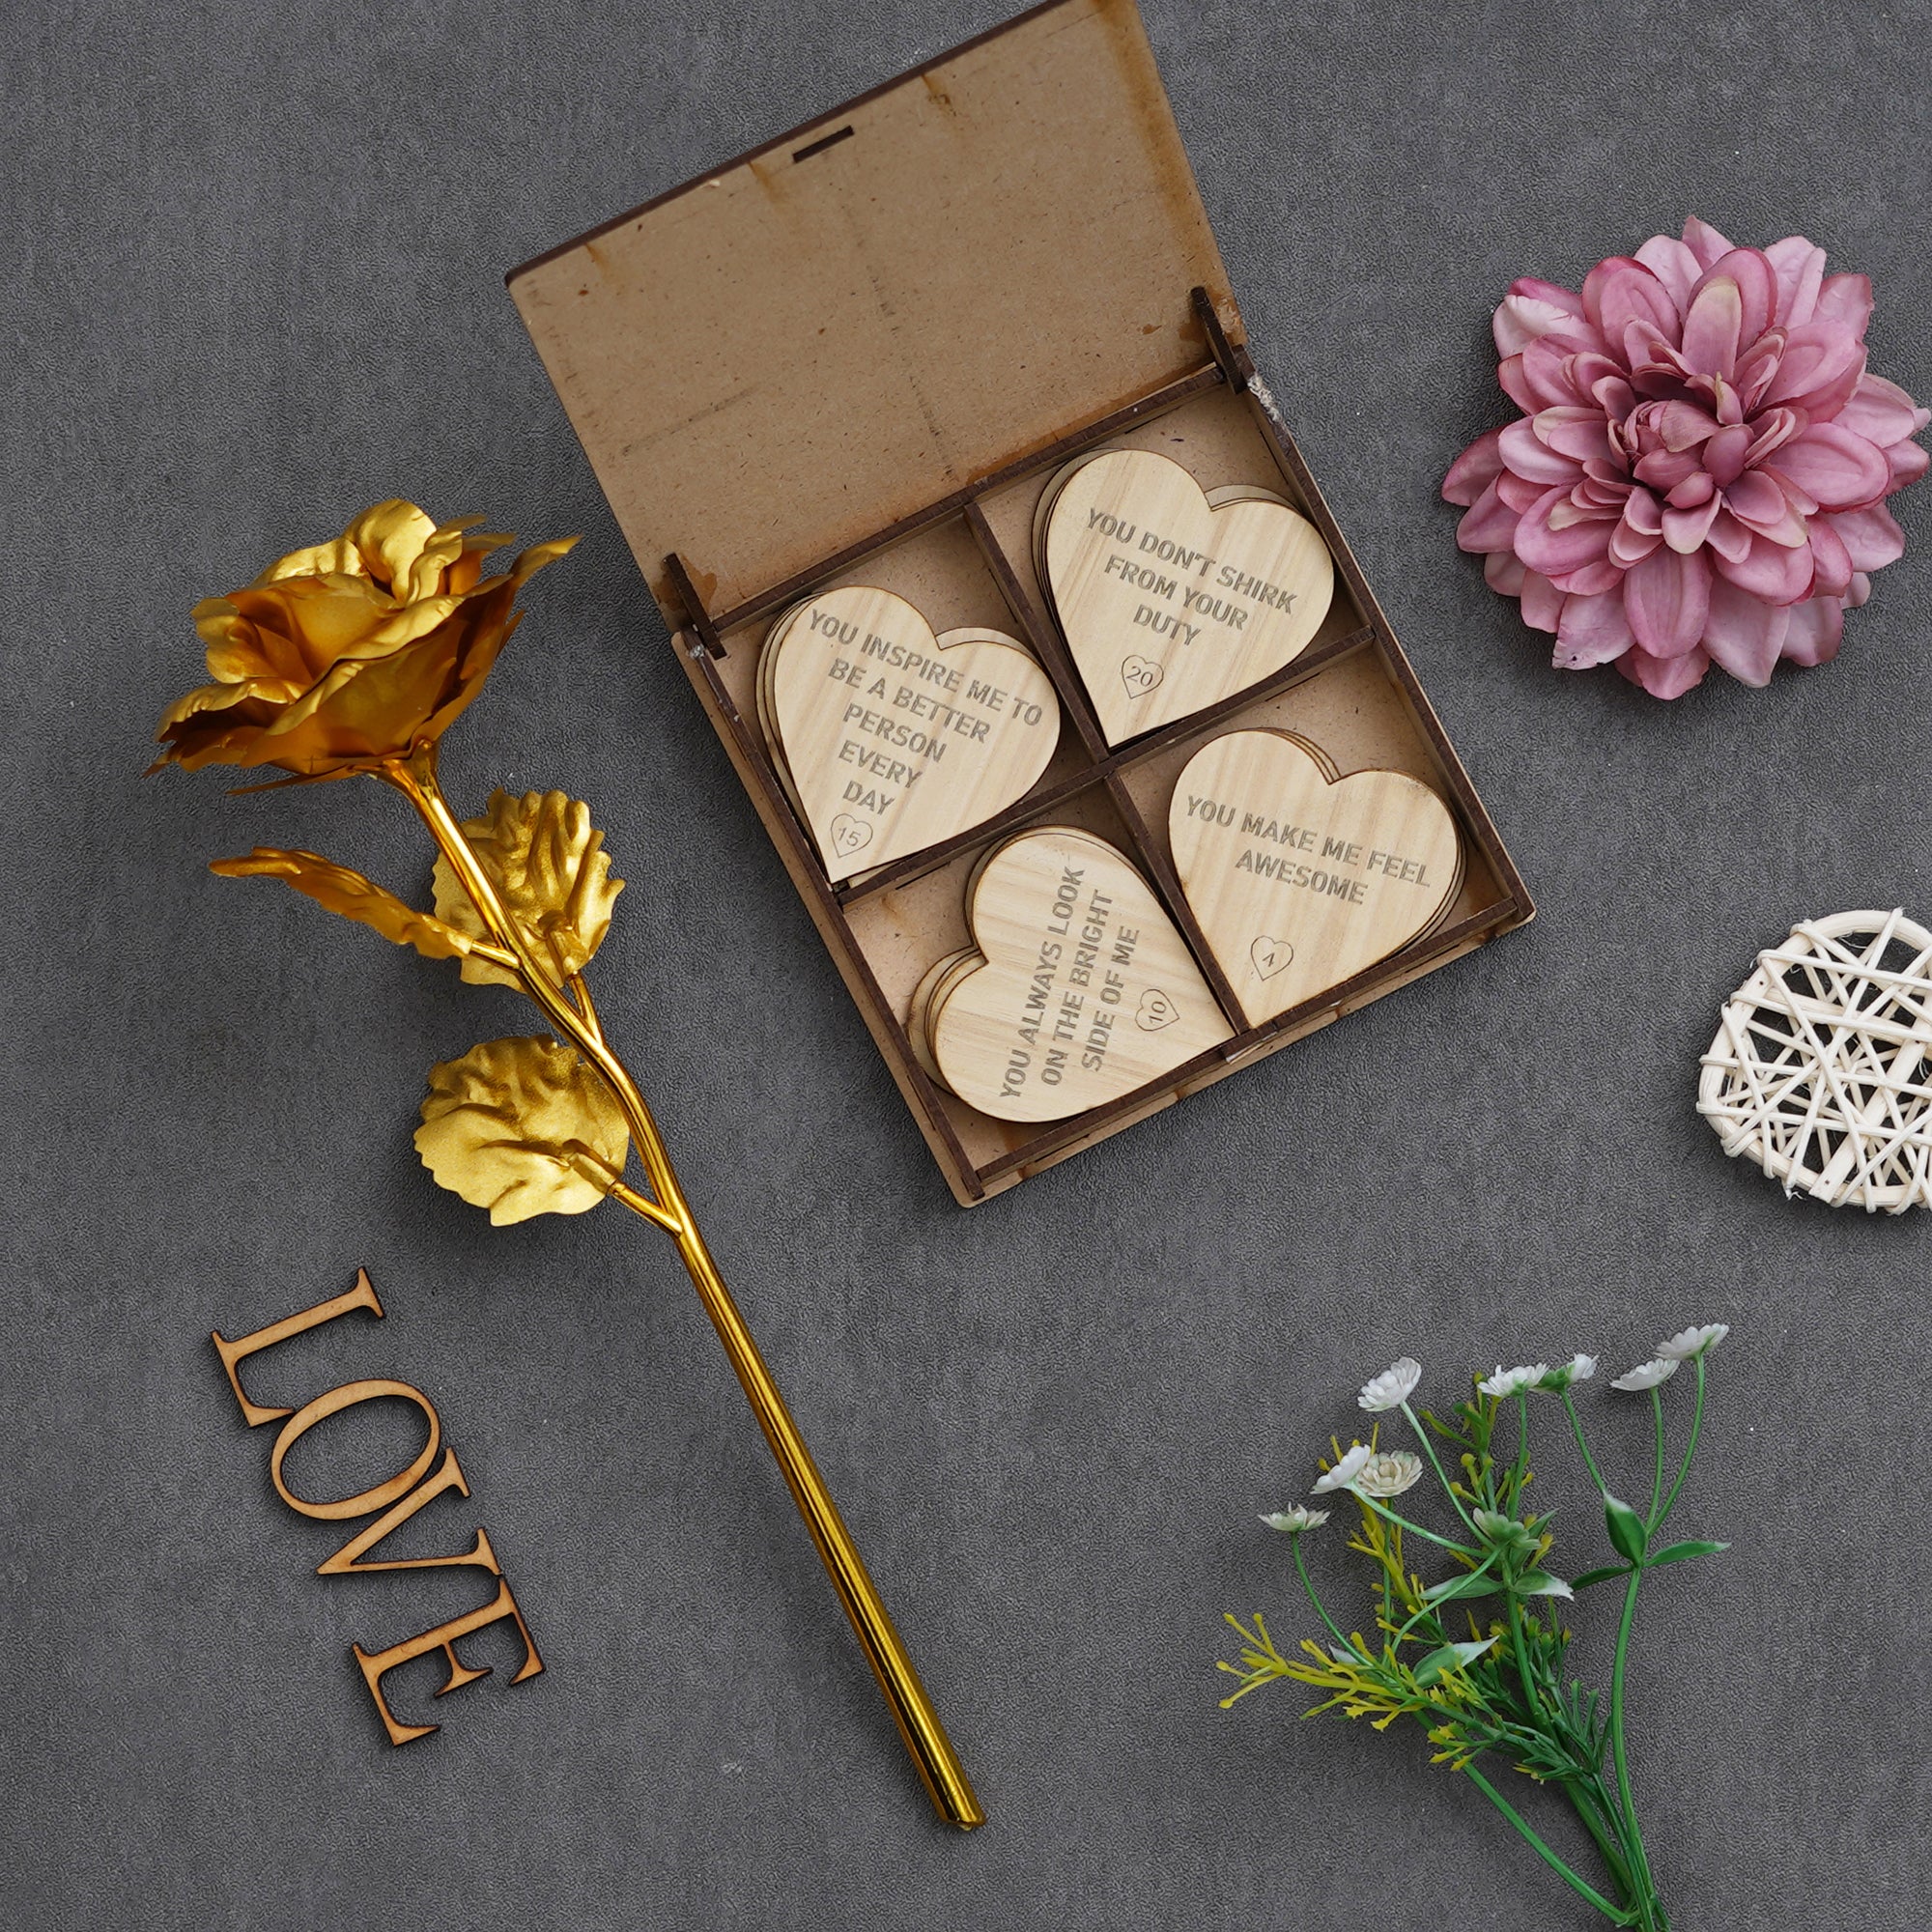 Valentine Combo of Golden Rose Gift Set, "20 Reasons Why I Need You" Printed on Little Hearts Wooden Gift Set